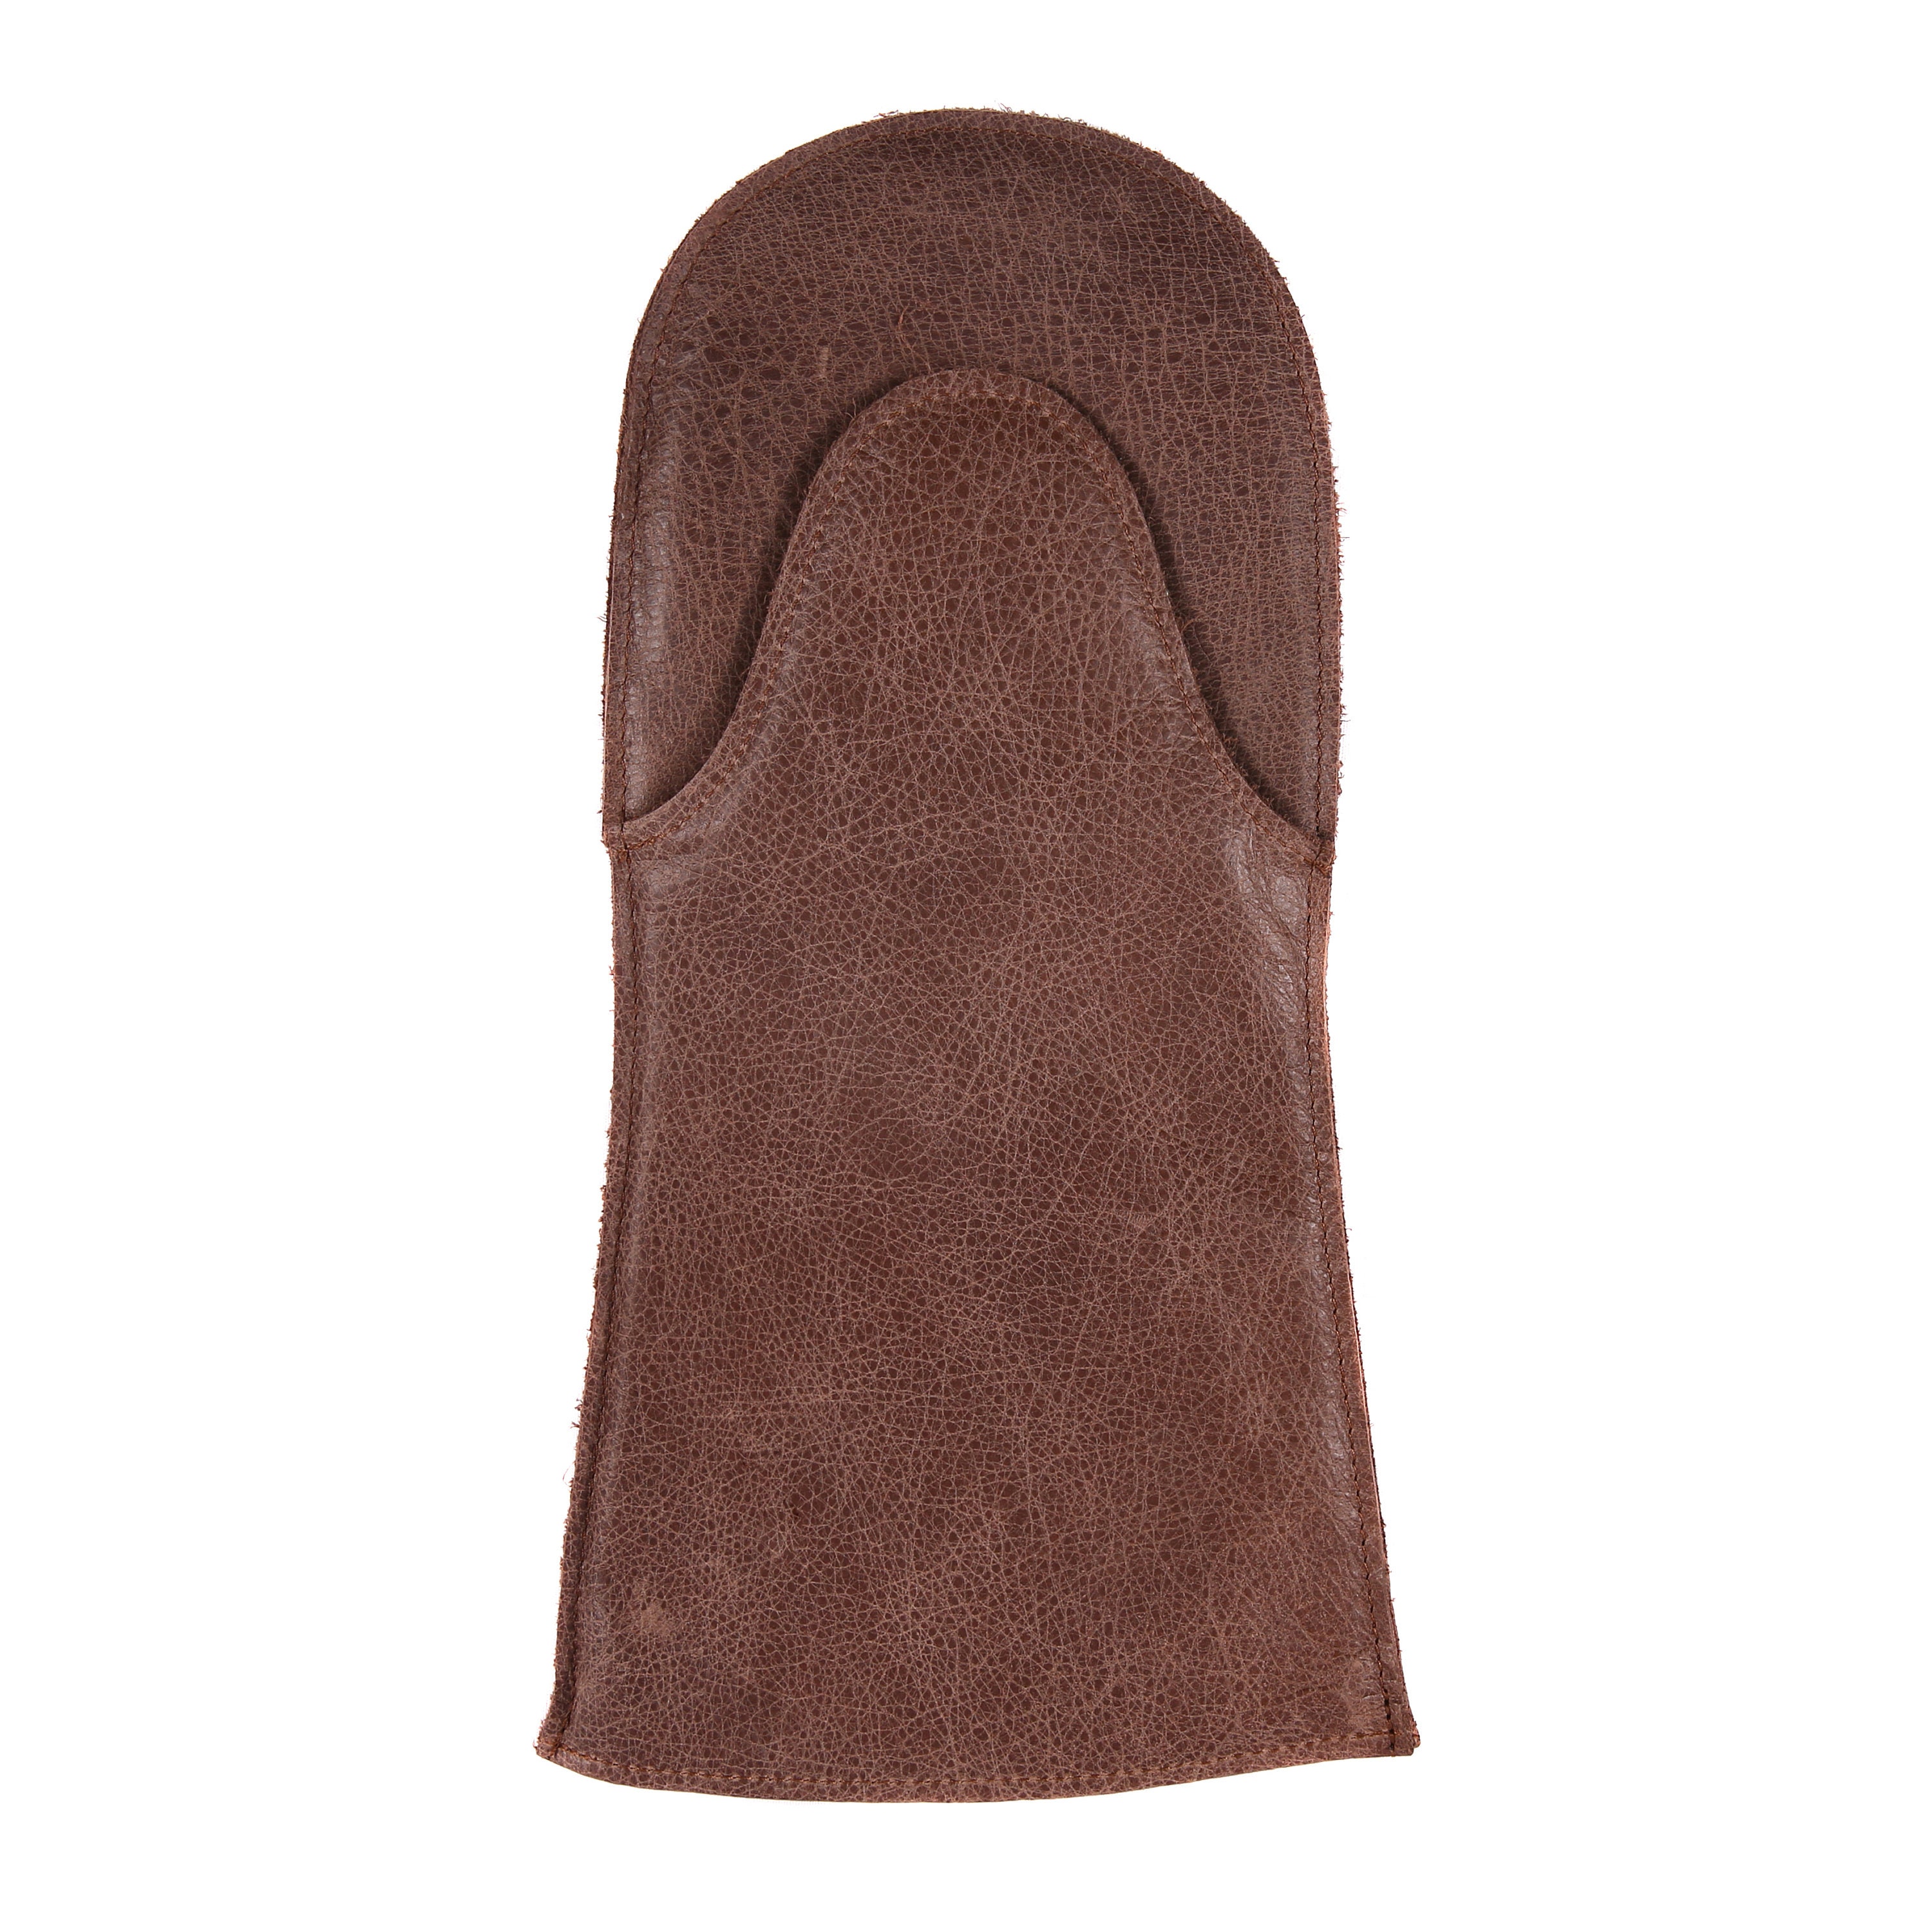 Premium Quality Buffalo Leather Oven Mitt for Use With Oven, Stove